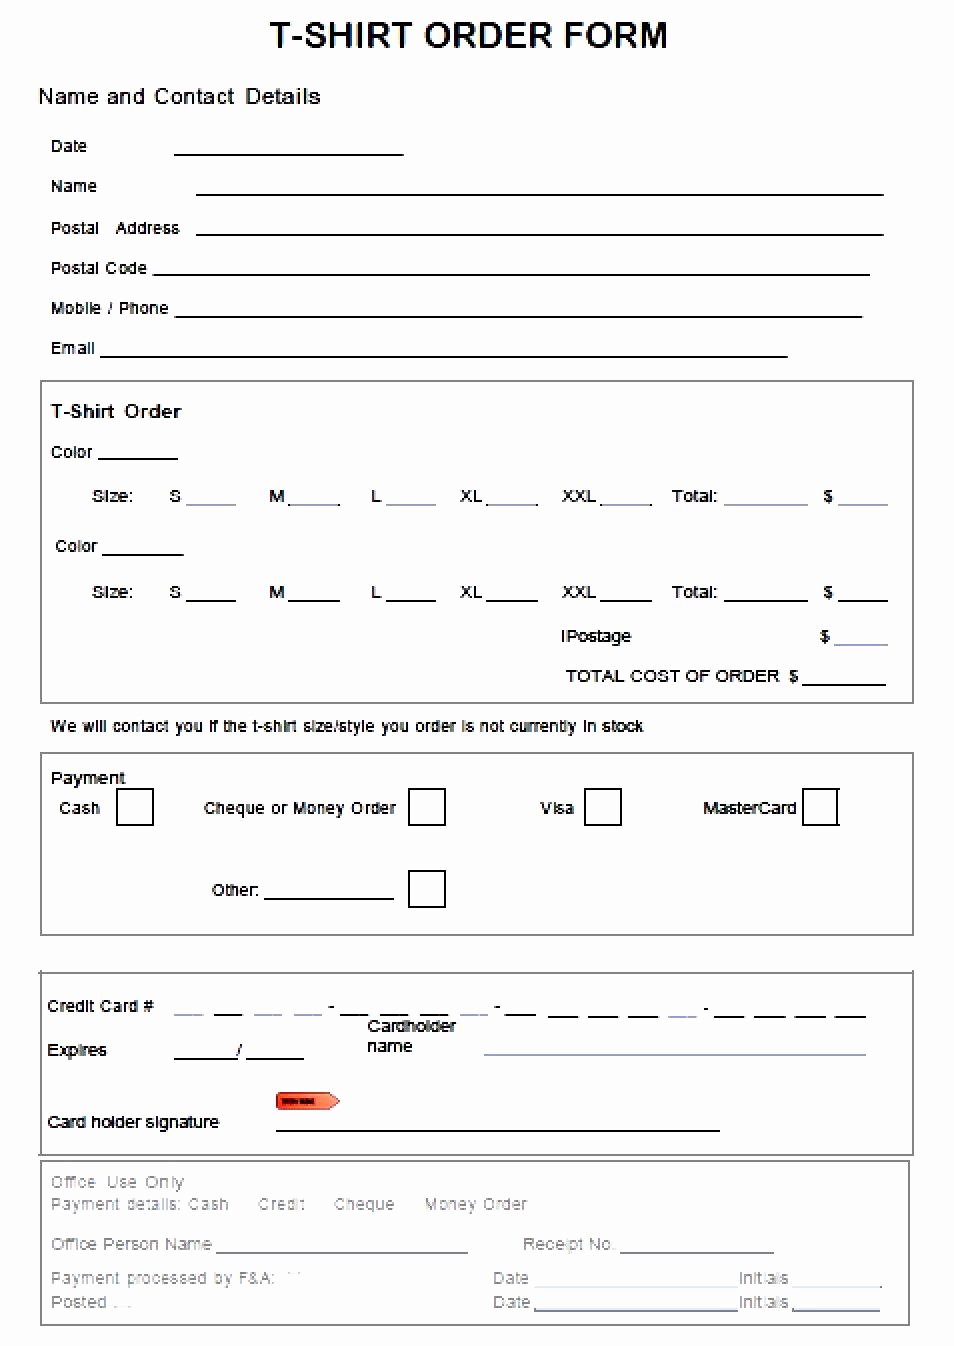 Tshirt order form Template Best Of T Shirt order form Template